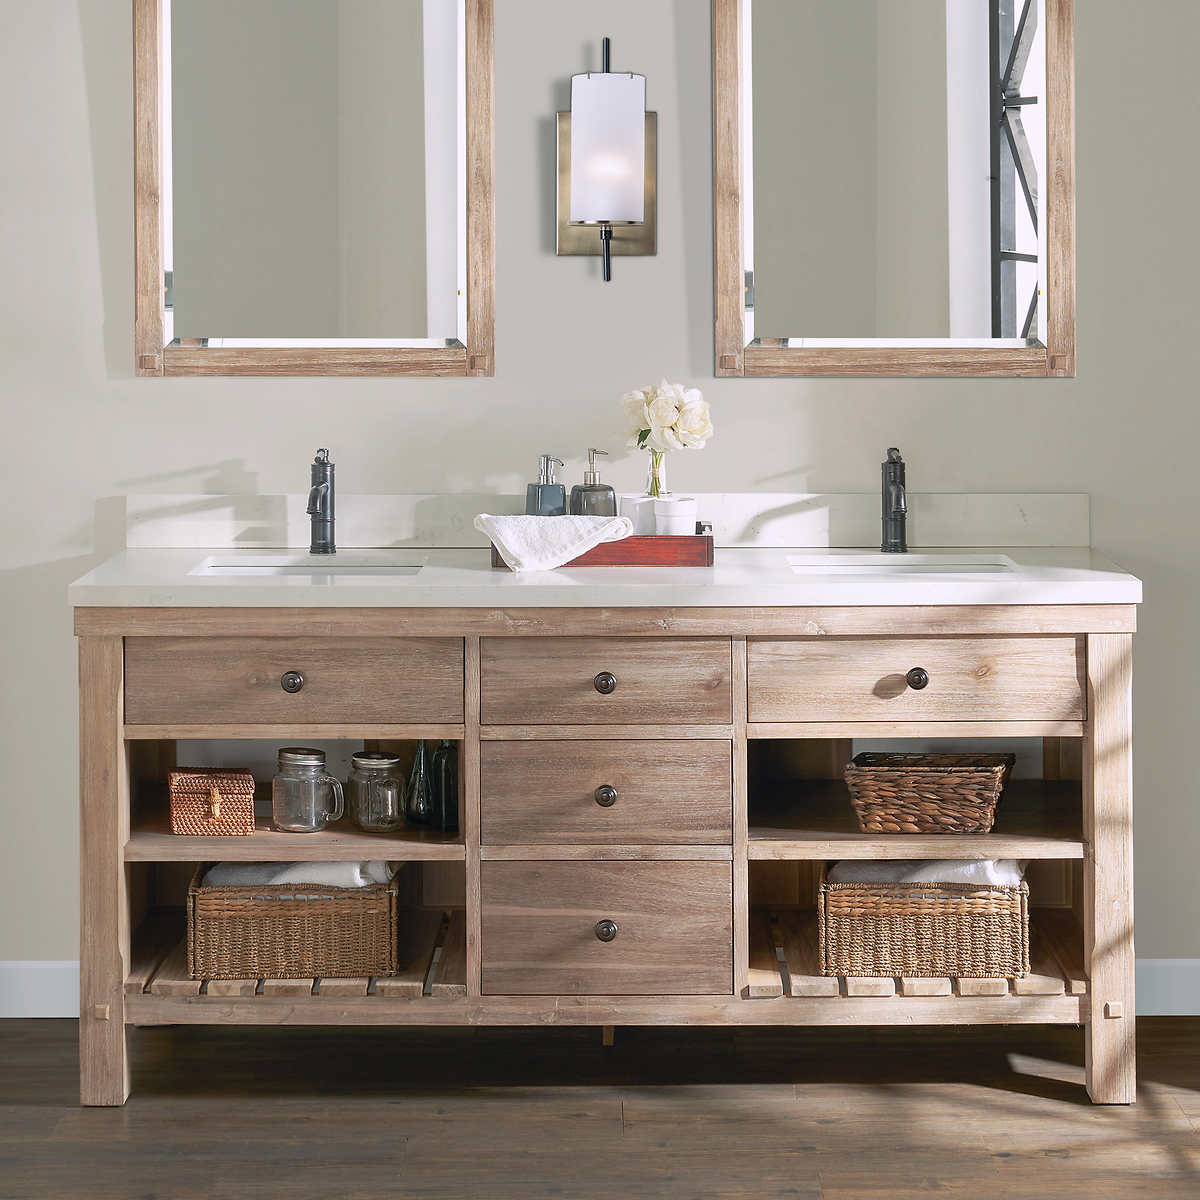 Elbe Rustic 72 Double Sink Vanity By, What Is The Standard Size For A Double Sink Vanity